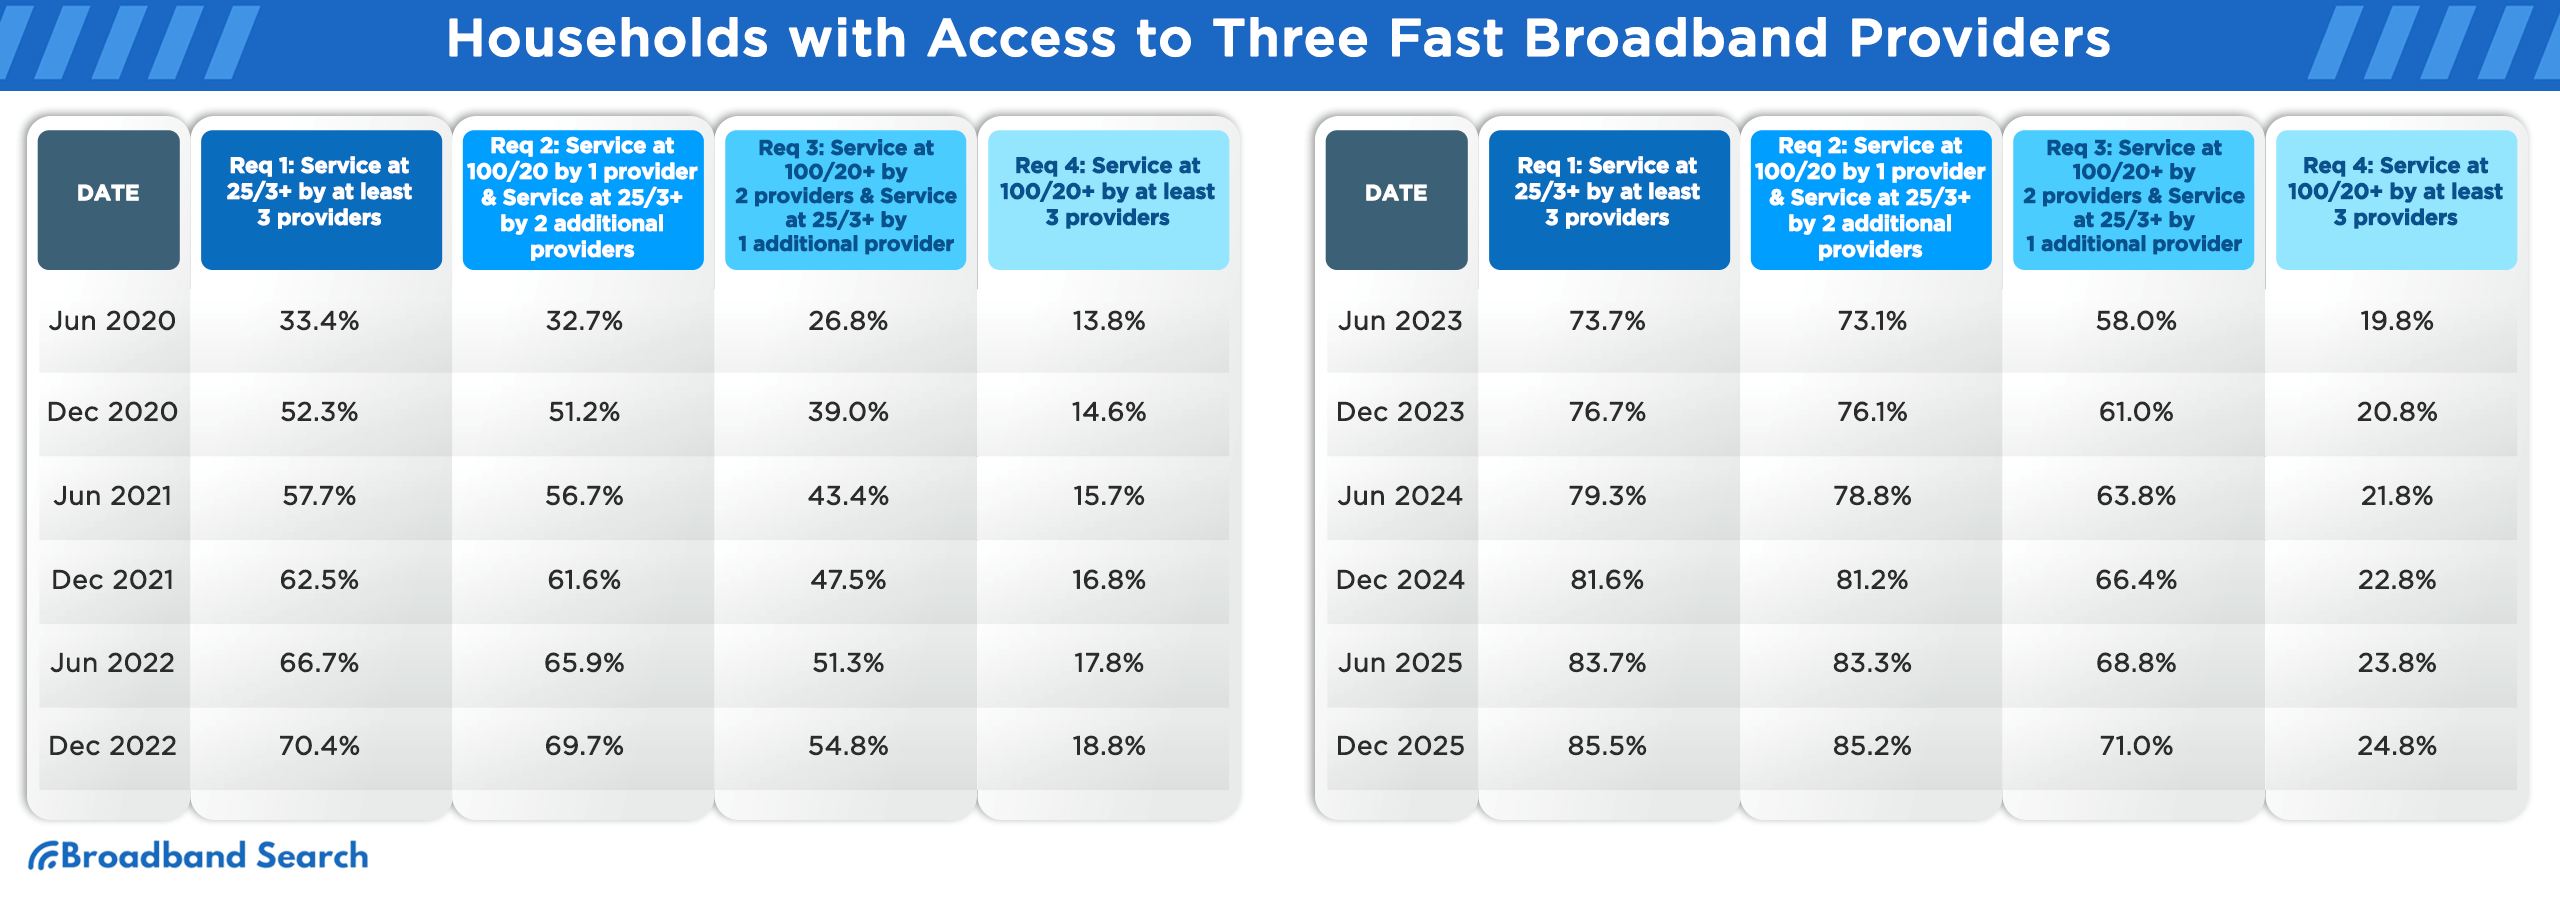 Households with access to three fast broadband service providers